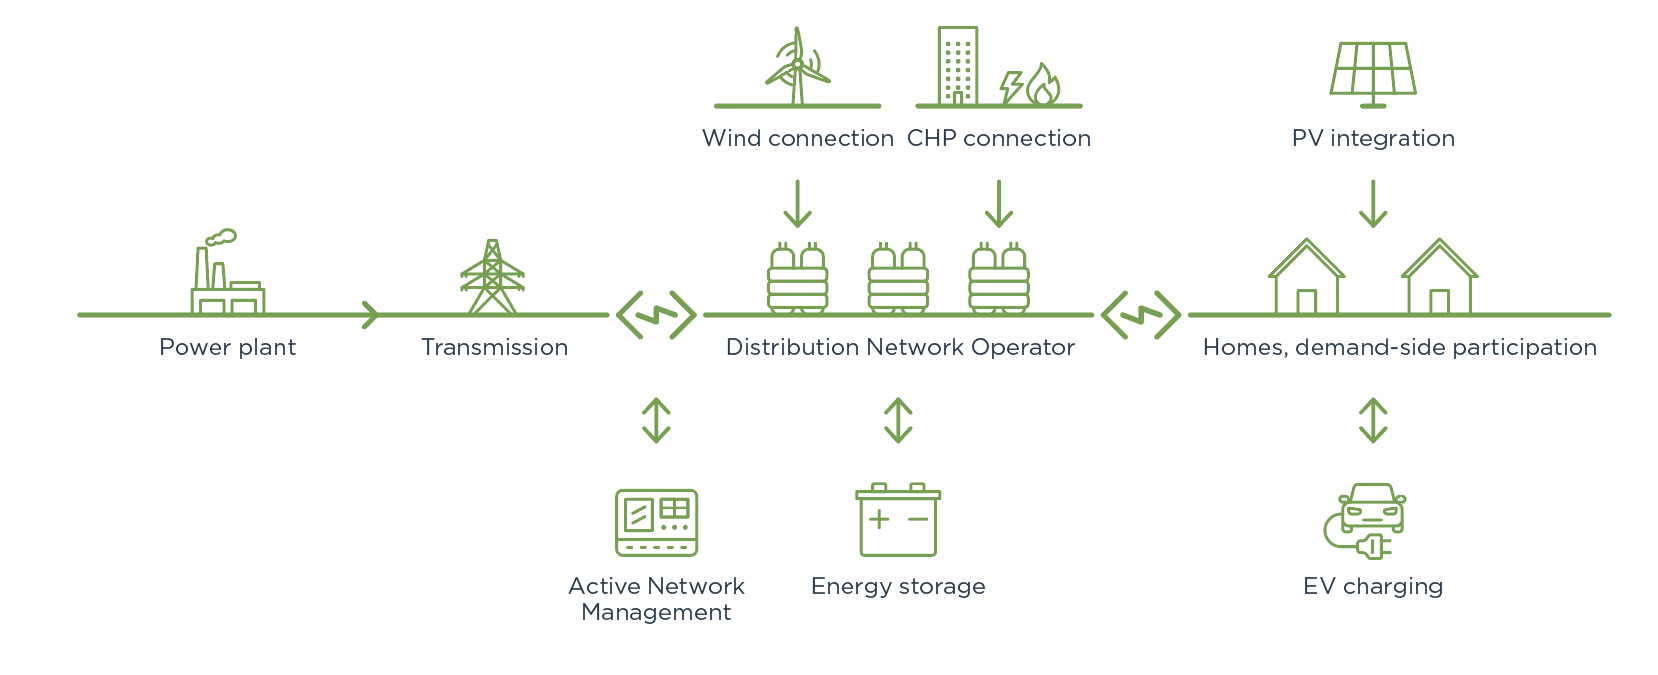 Distributed generation model